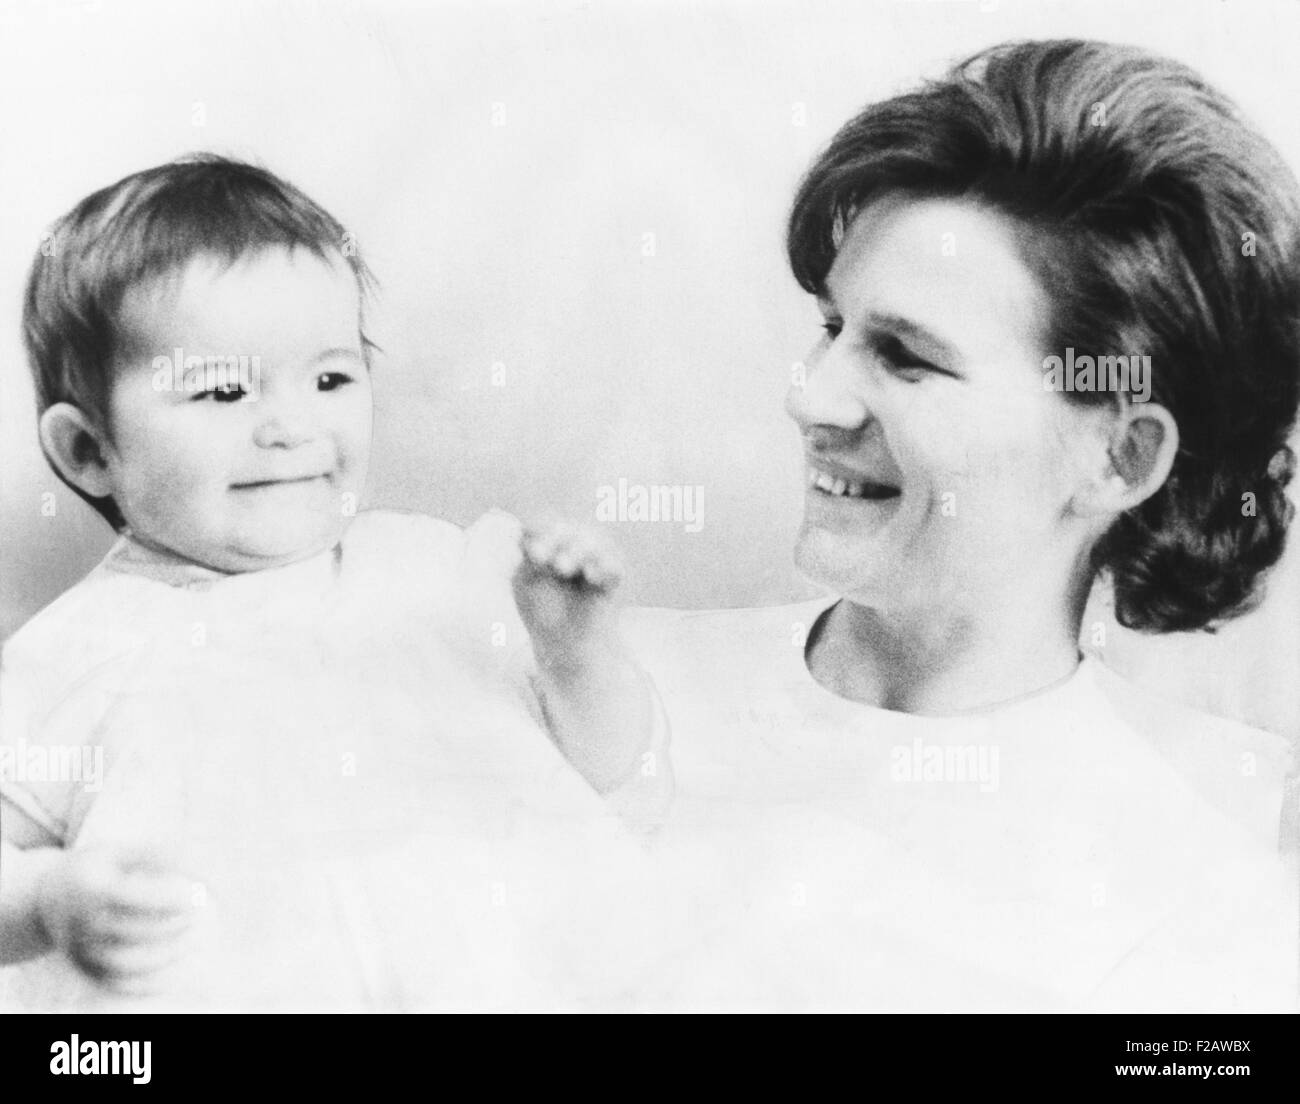 Russian cosmonaut Valentina Nikolayeva-Tereshkova with her one-year-old daughter, Alyenushka. Valentina married cosmonaut Adrian Nikolayeva shortly after she became the first woman to be launched into space. Valentina became a prominent member of the Communist Party of the Soviet Union, and remained politically active following the collapse of the USSR in 1991. (CSU 2015 11 1422) Stock Photo